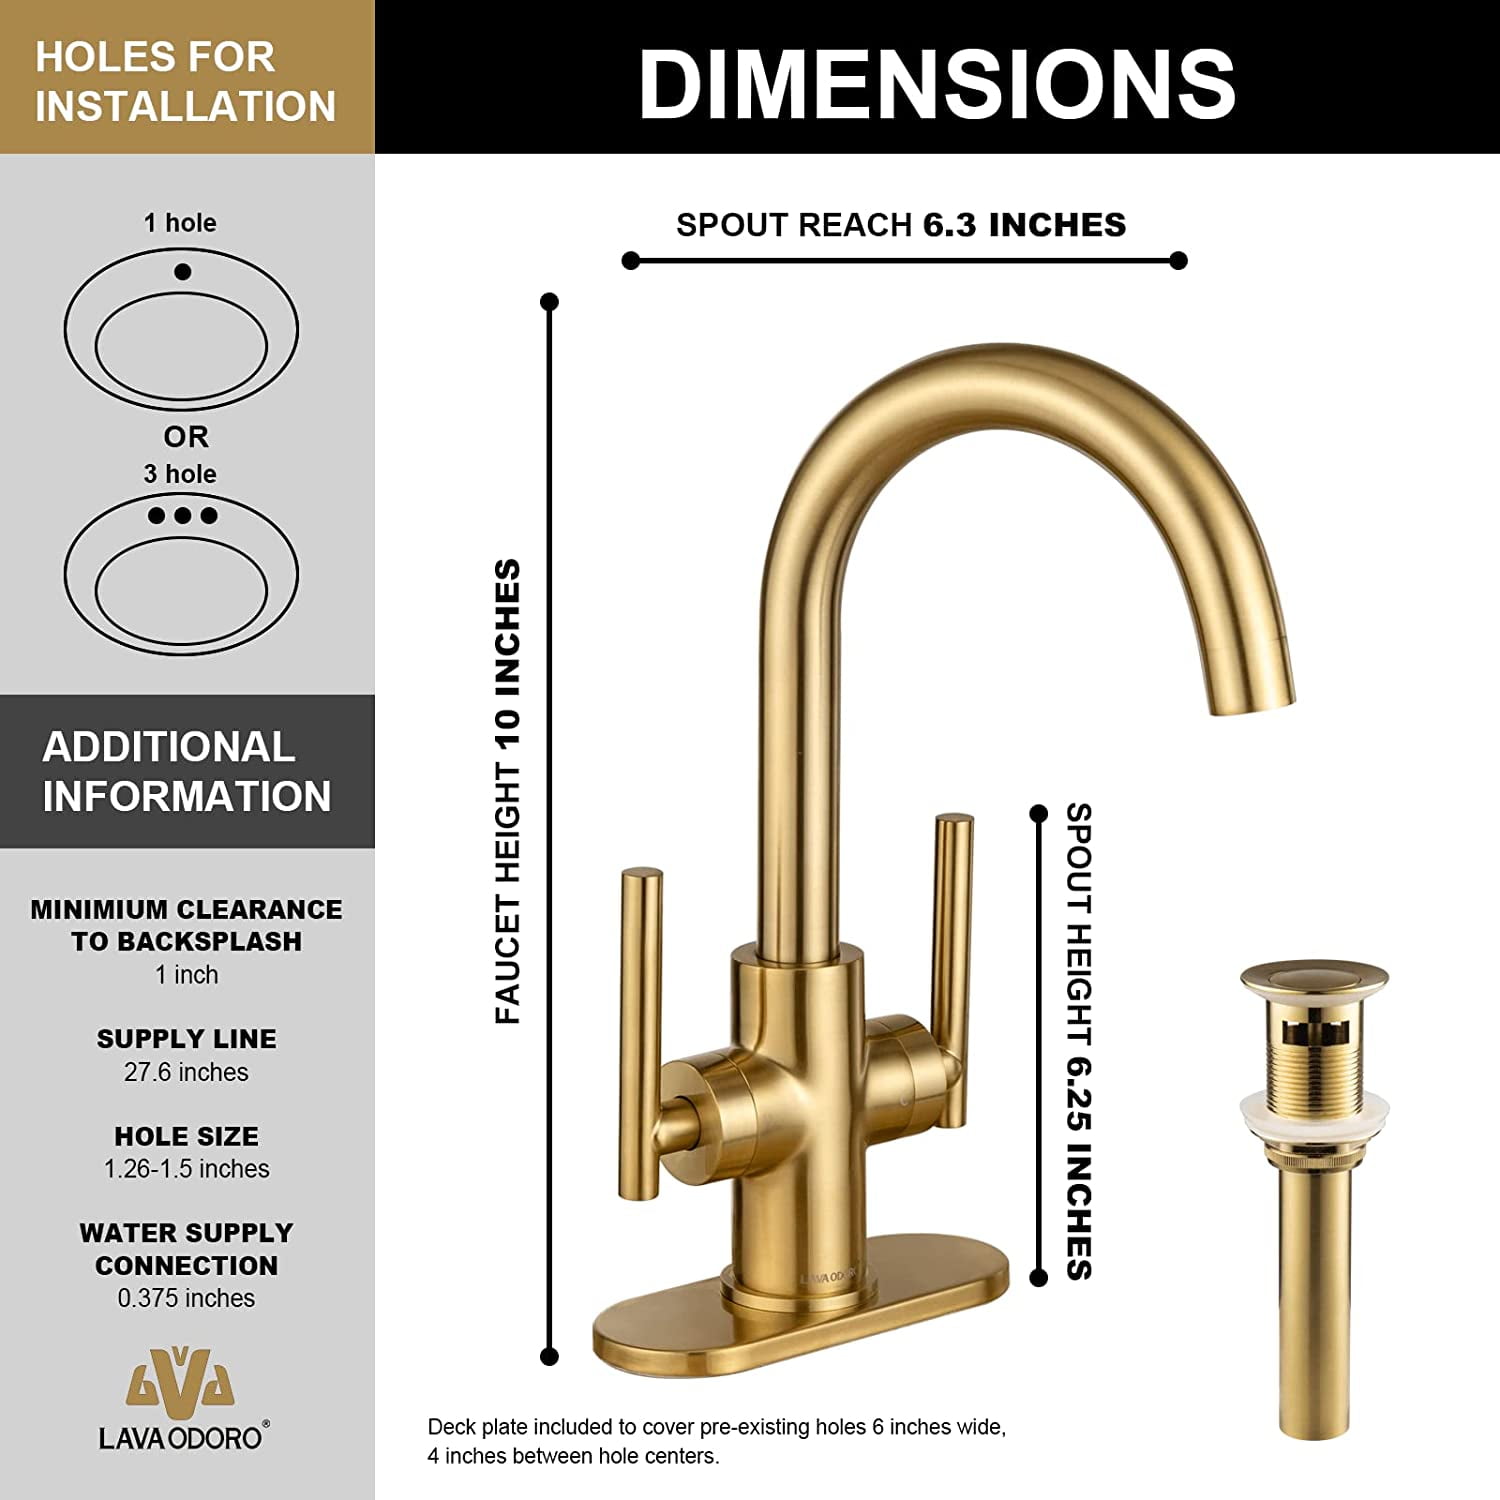 SOKA Brass Bathroom Faucet Brushed Gold Bathroom Sink Faucet Gold with Pop- up Sink Drain Stopper ＆ Deck Plate or Hole Bathroom Faucet 並行輸入品 